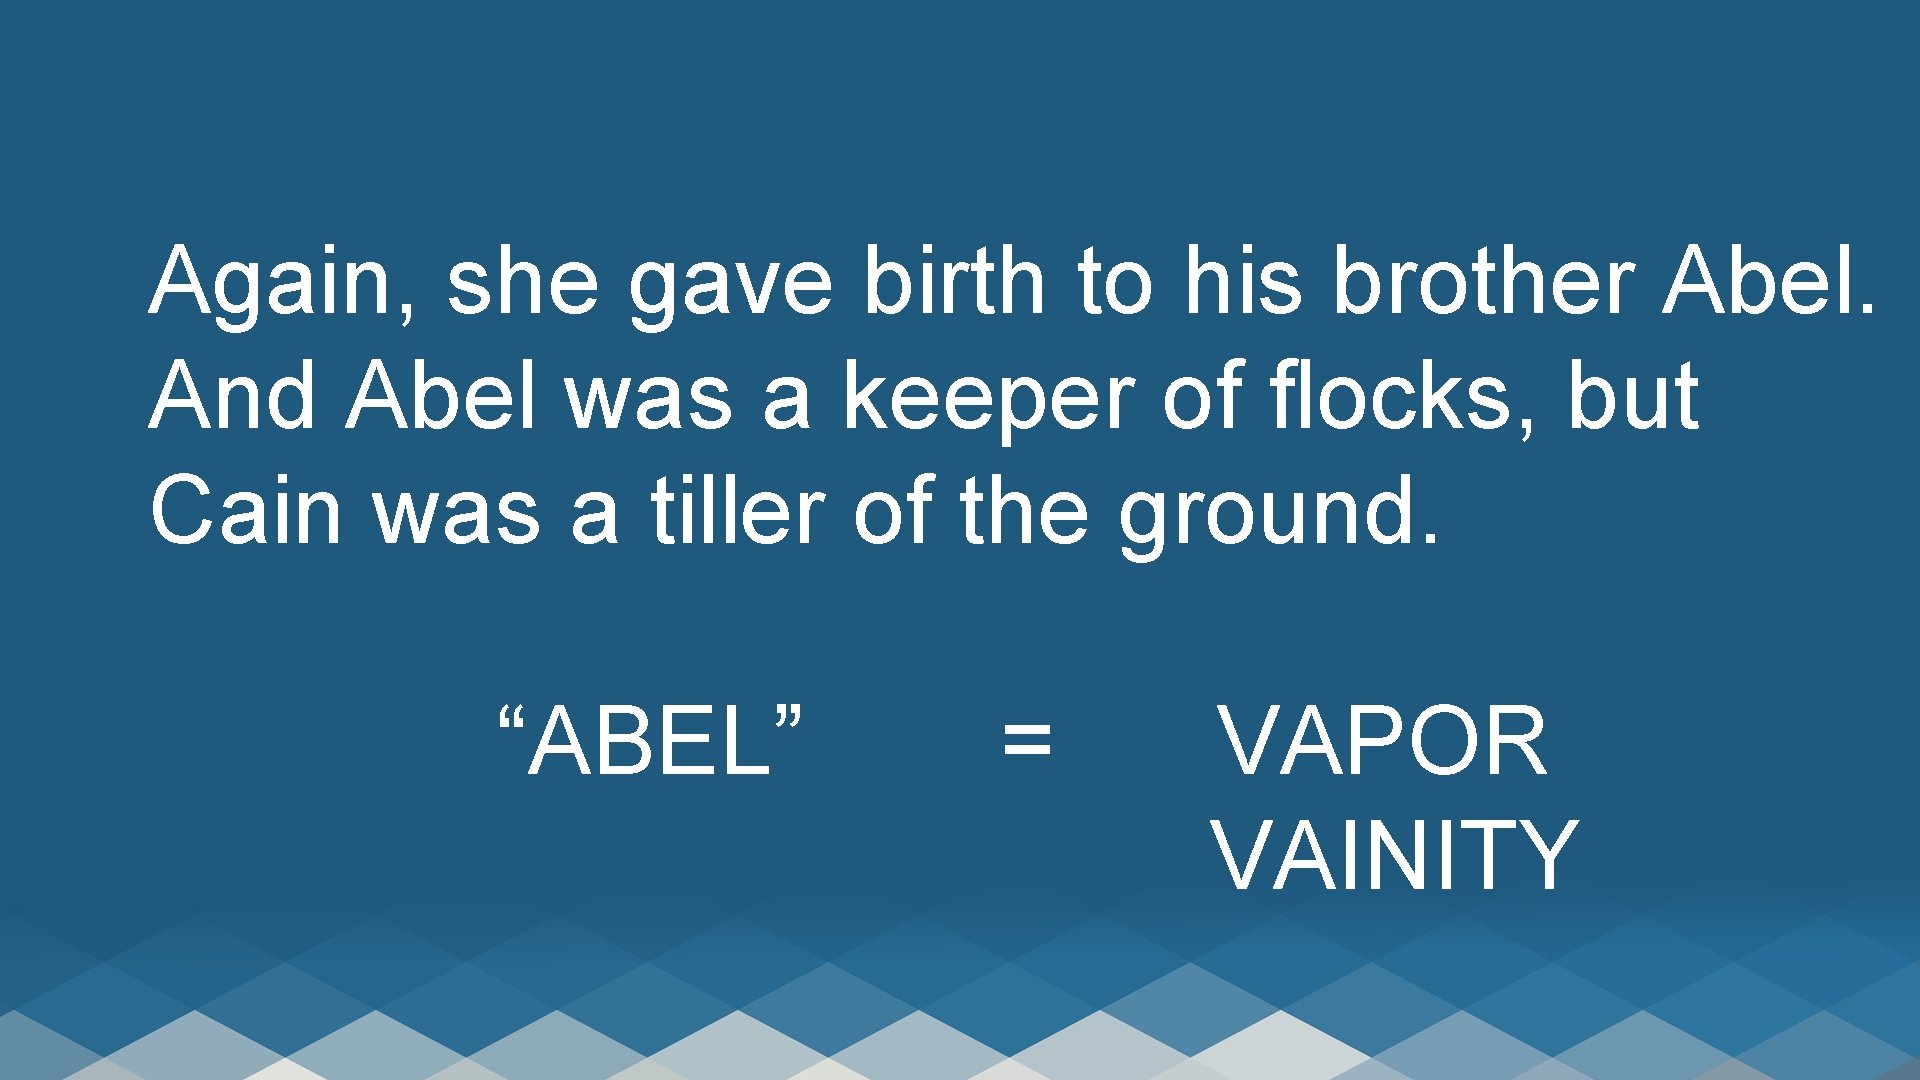  Again, she gave birth to his brother Abel. And Abel was a keeper